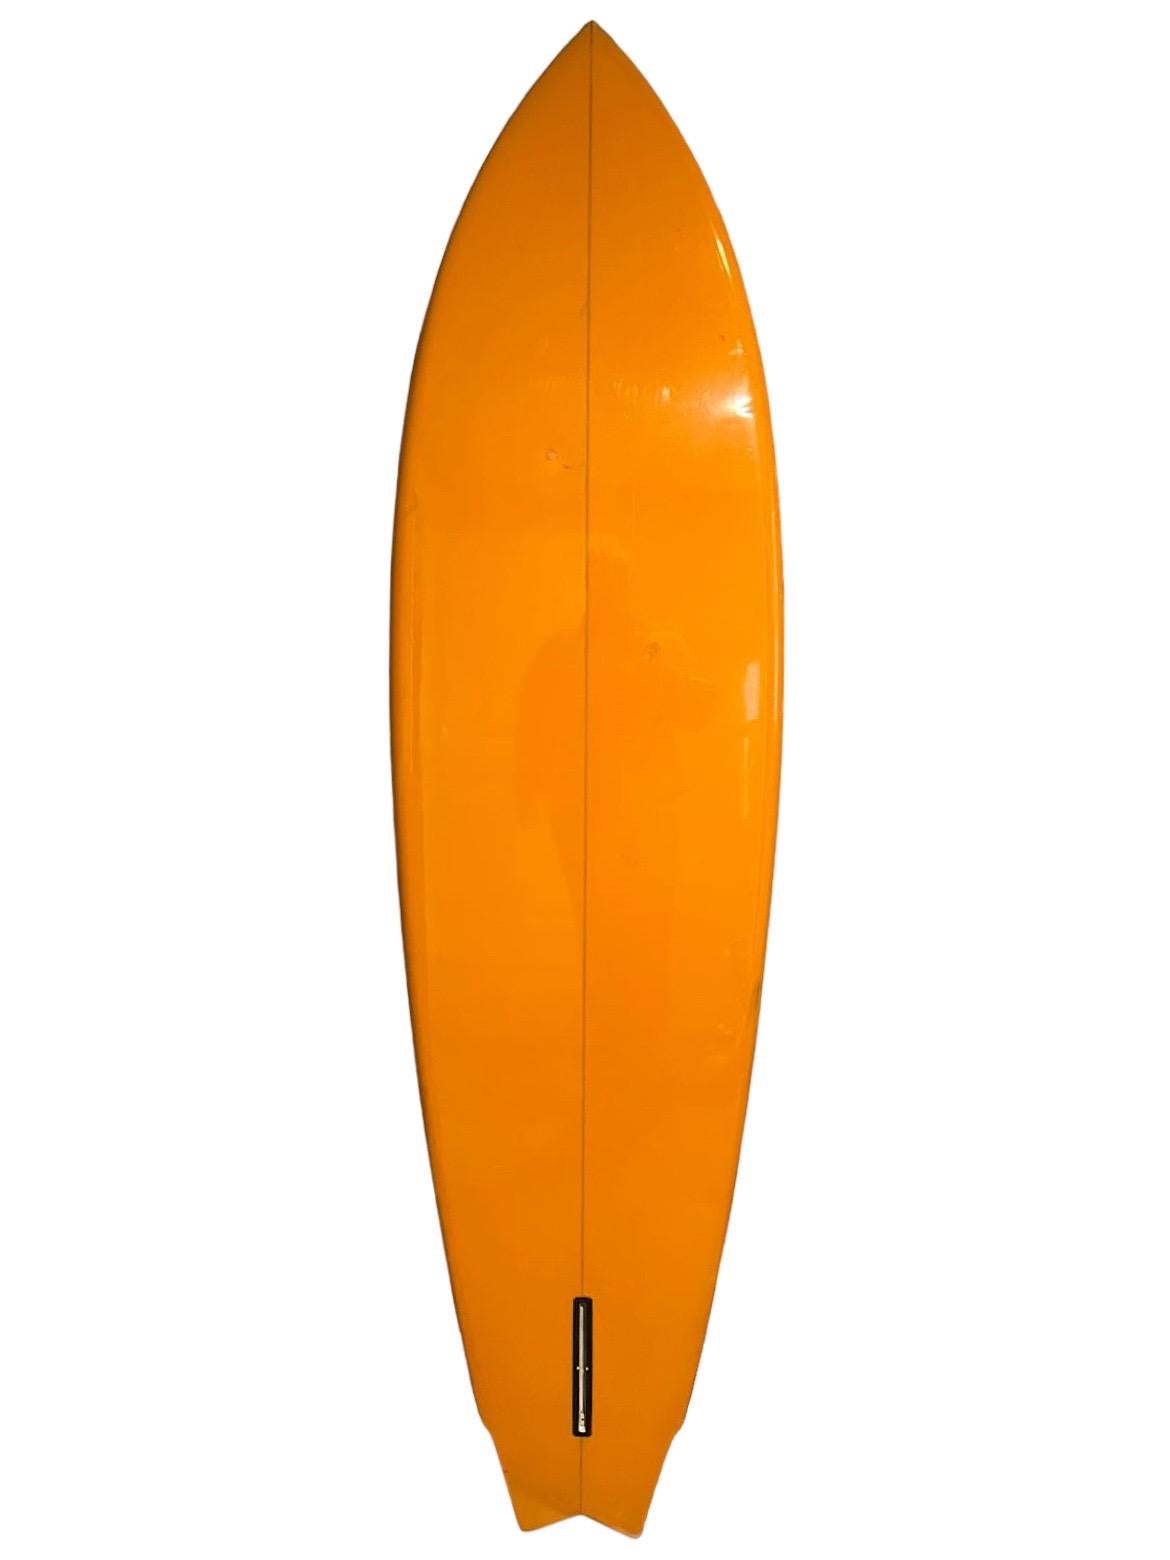 Mid-1970s Lightning Bolt Gerry Lopez model surfboard. Features beautiful orange tint and bright yellow lightning bolt. Unique V swallow tail. A remarkable example of an all original 1970s Gerry Lopez model Lightning Bolt surfboard to ride or